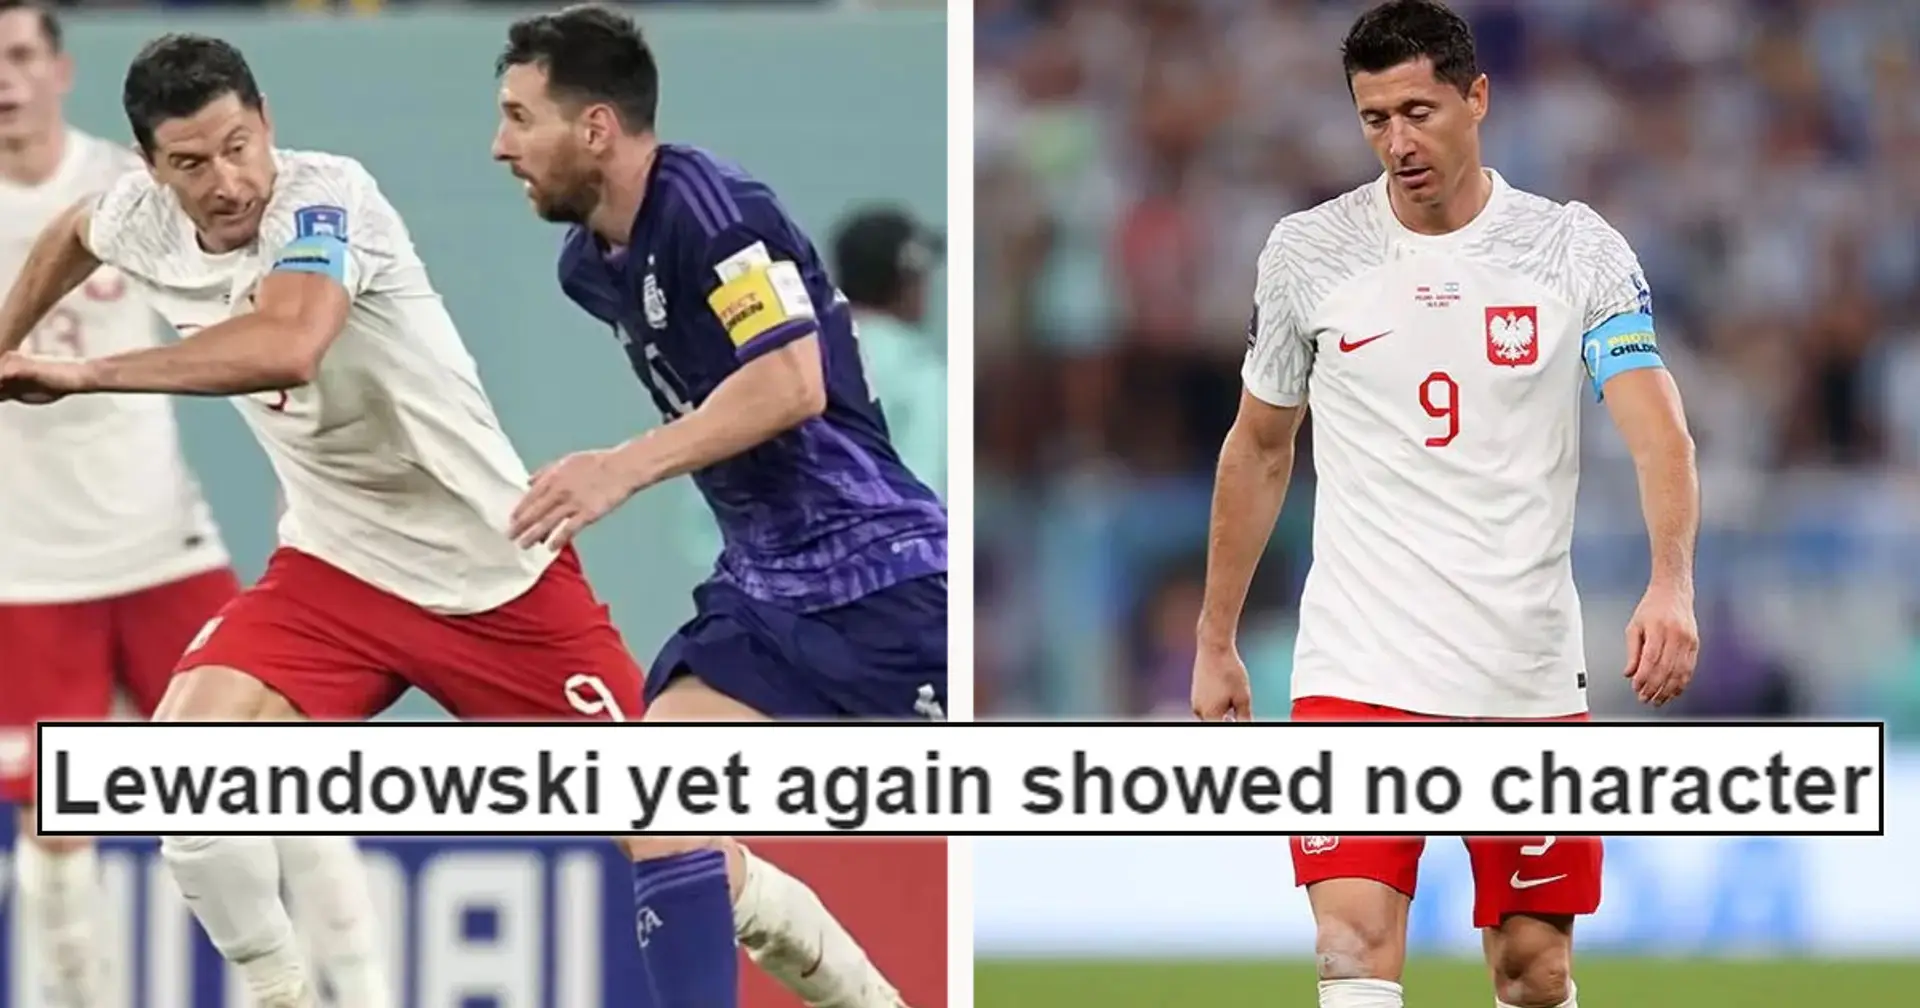 'Ghosted so much Messi couldn't even see him': Real Madrid fans drag Lewandowski after poor Argentina showing